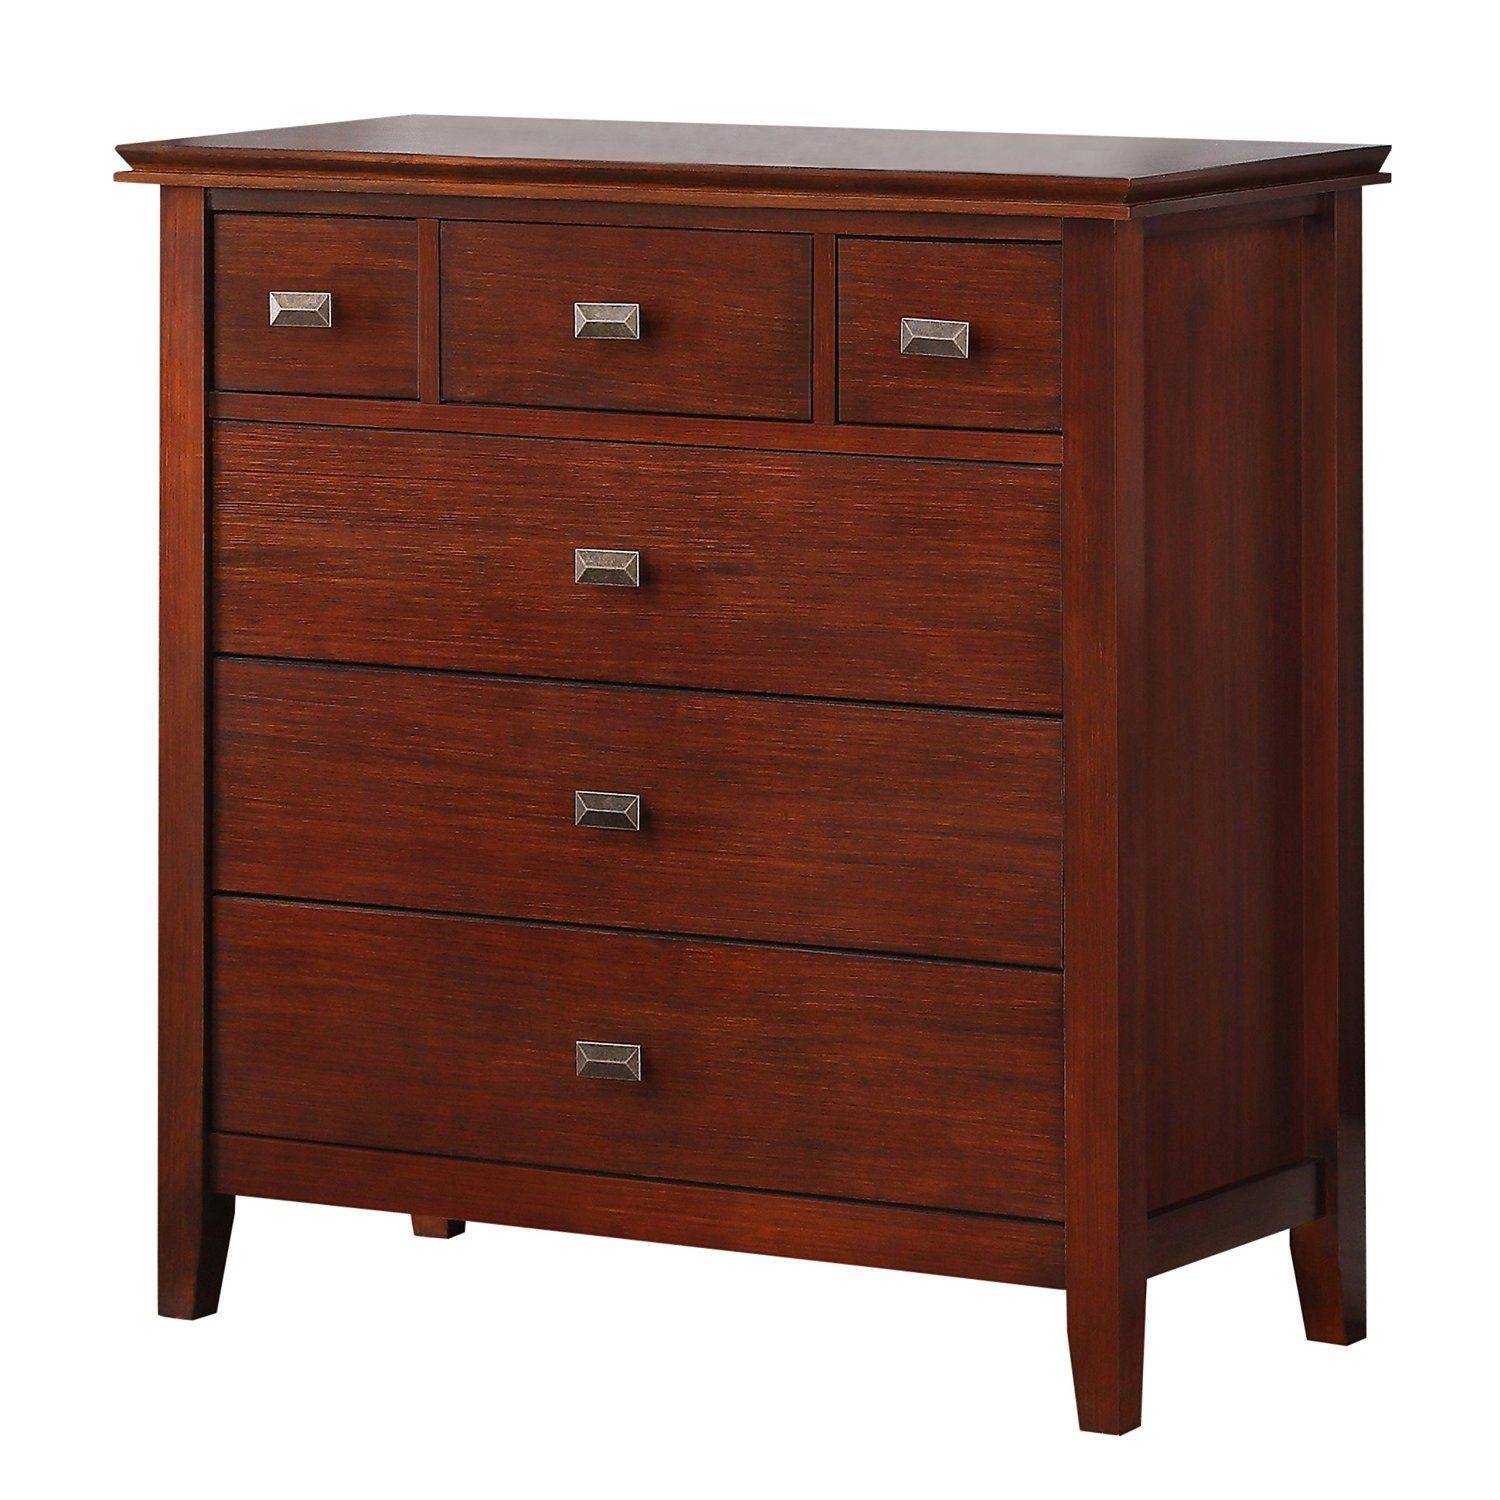 Solid Wood Chest Of Drawers Visualhunt, 36 Inch Wide Tall Dresser